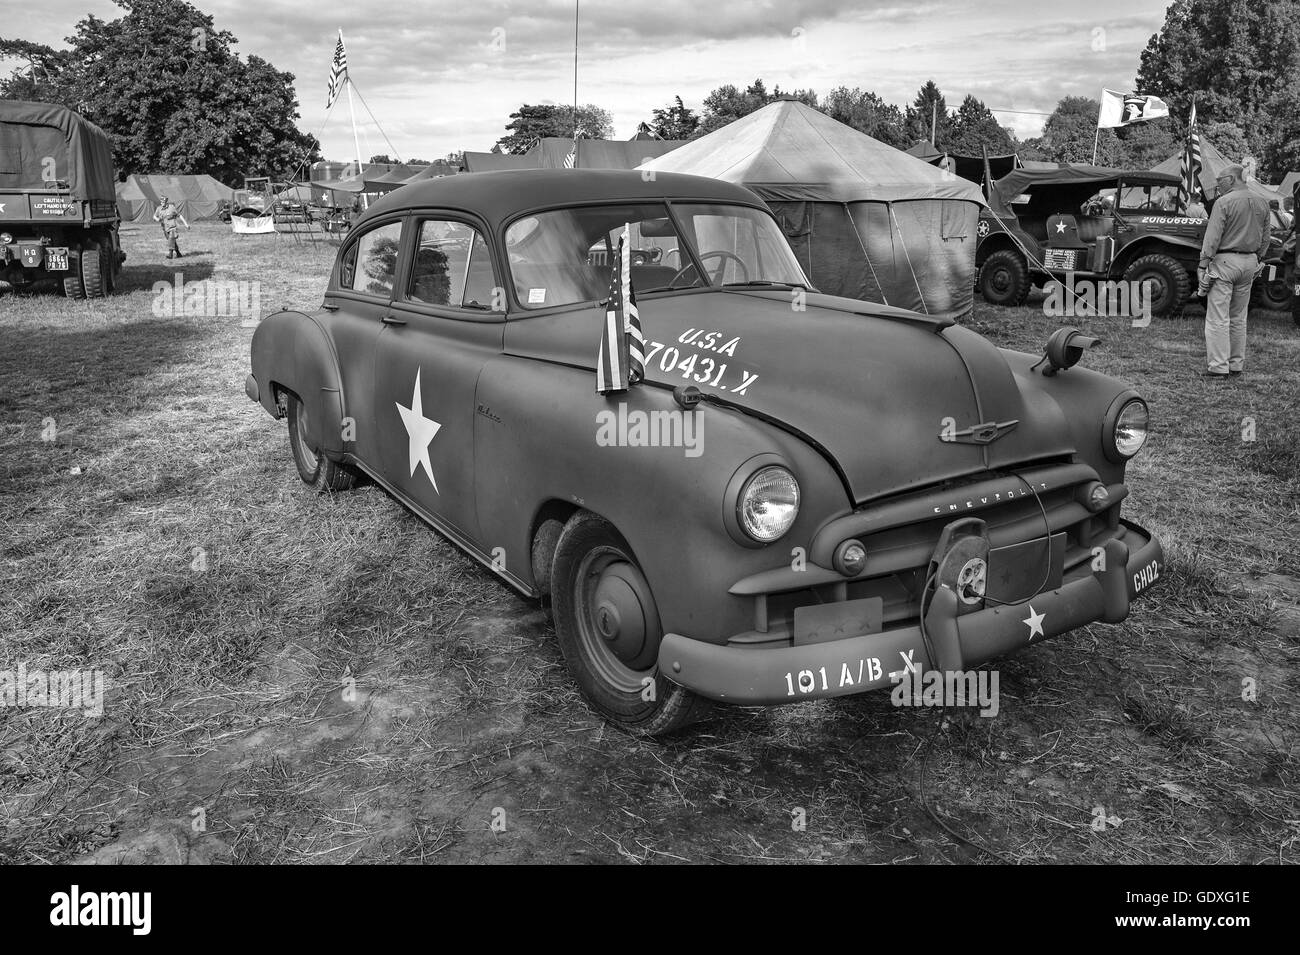 Chevrolet oldtimer at the D-Day reenactment at Sainte Mere Eglise in France, 2014 Stock Photo